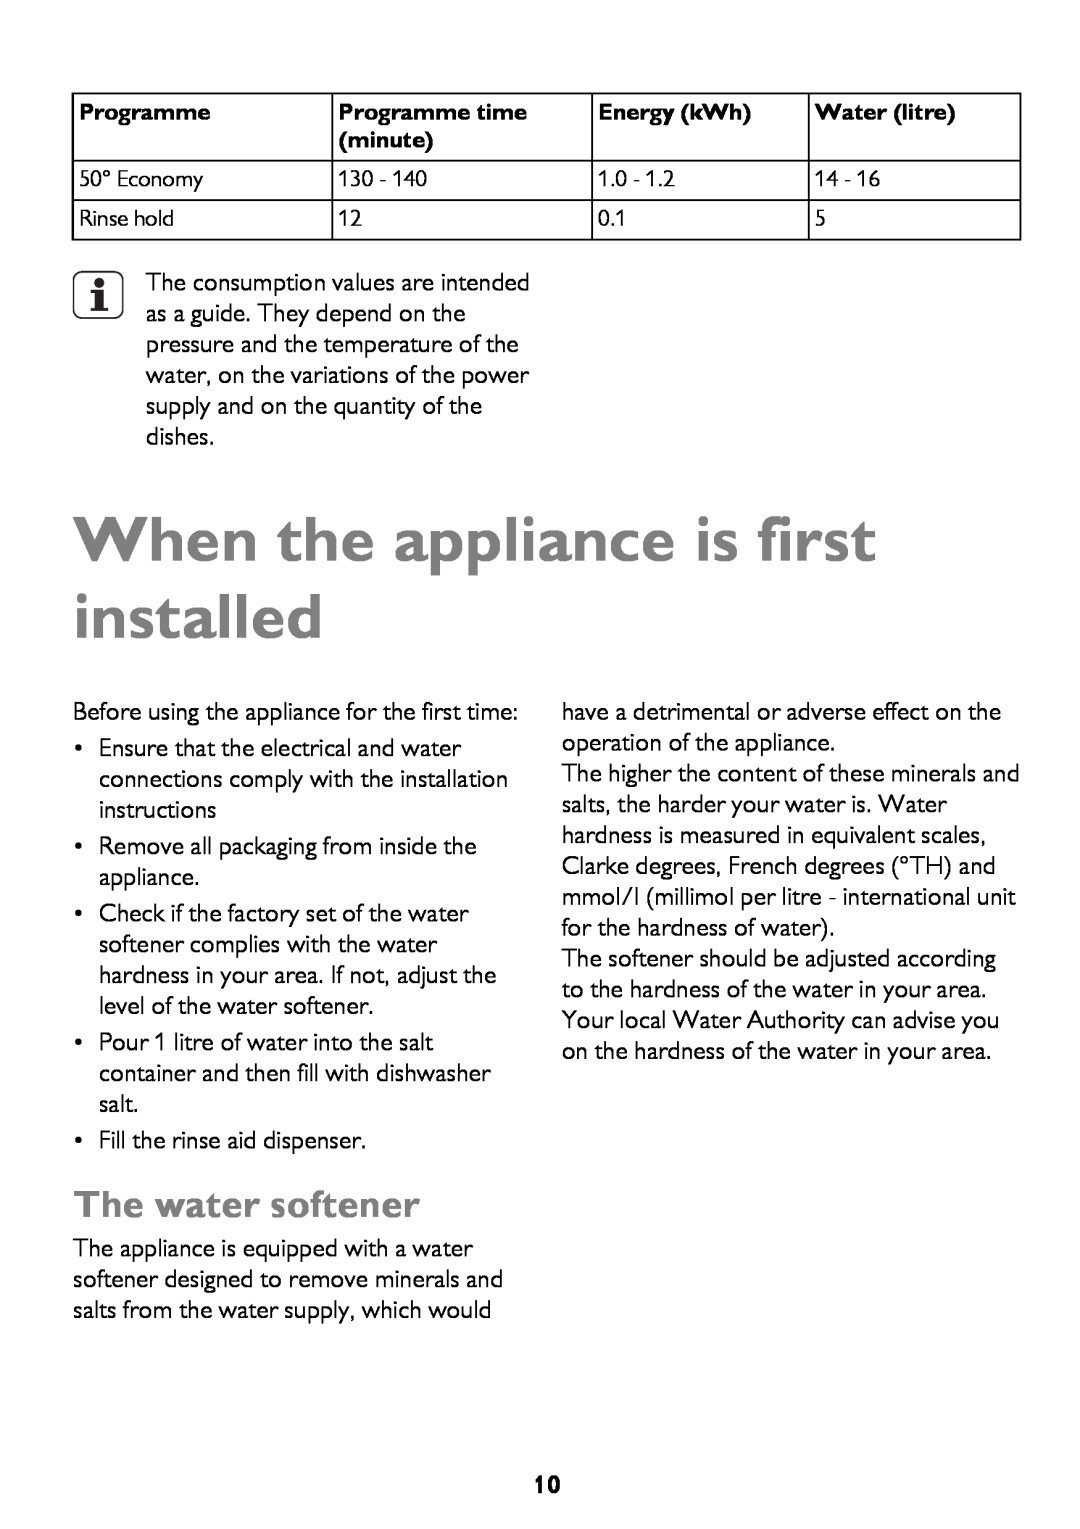 John Lewis JLBIDW 1201 instruction manual When the appliance is first installed, The water softener 